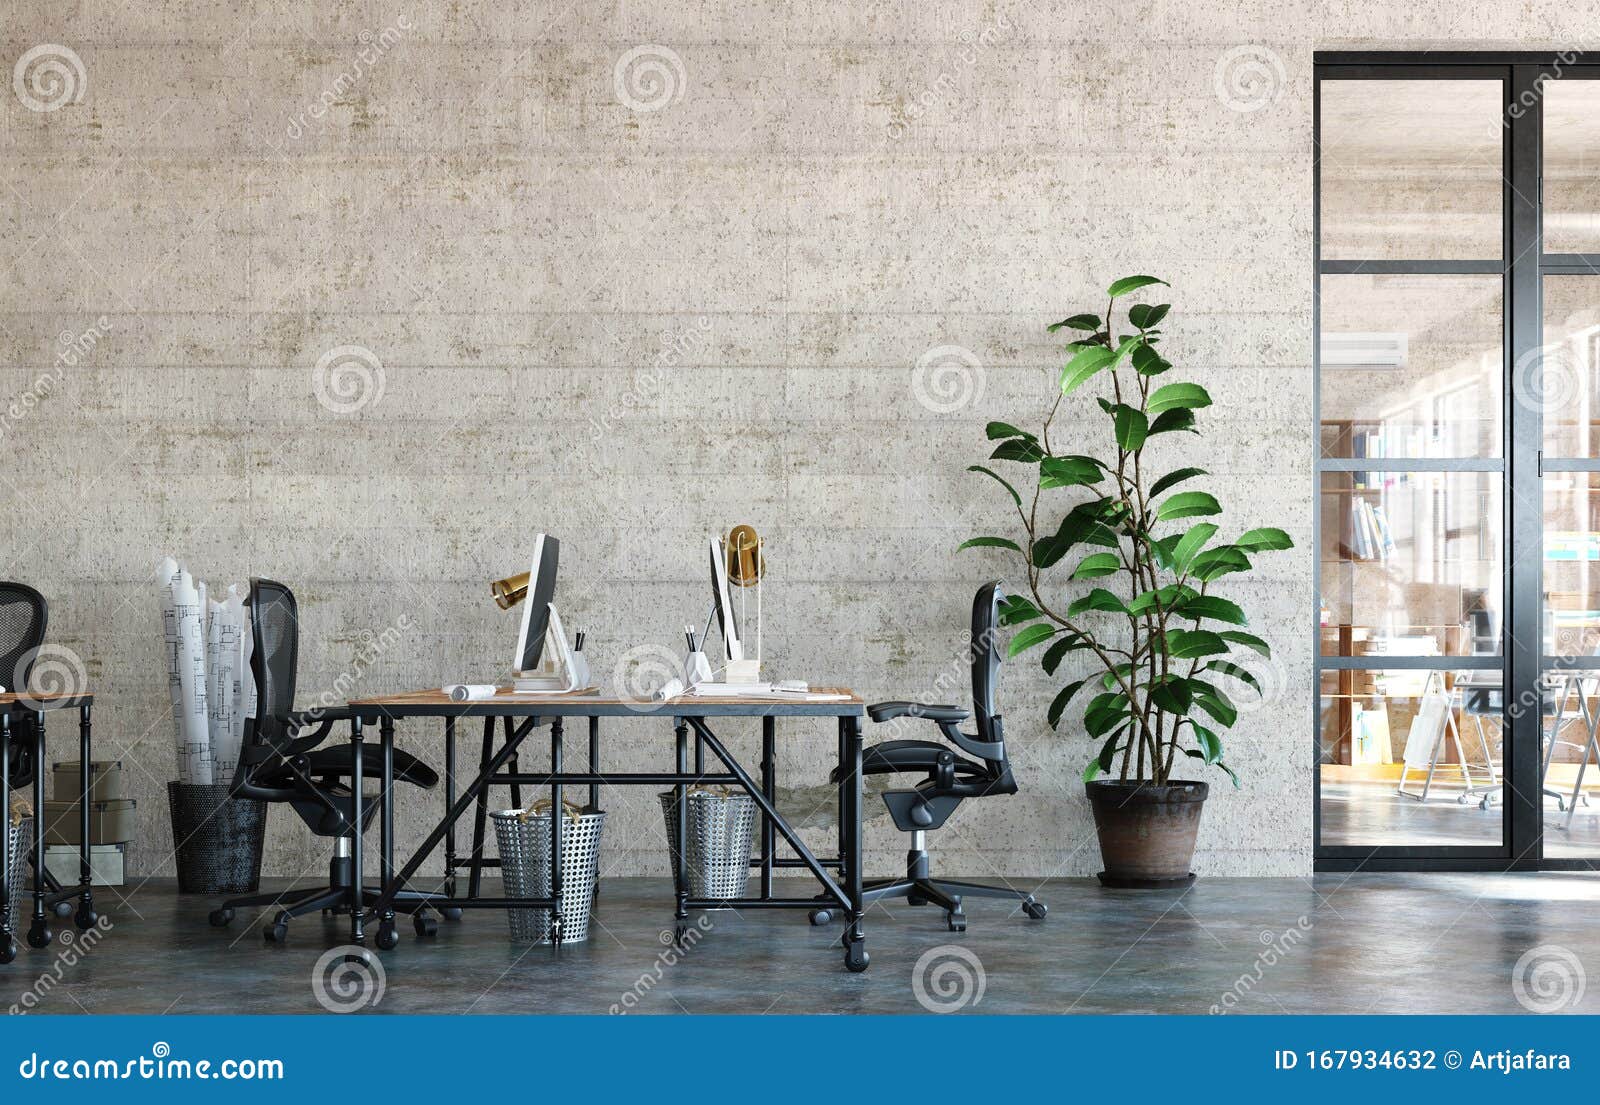 office interior in loft, industrial style